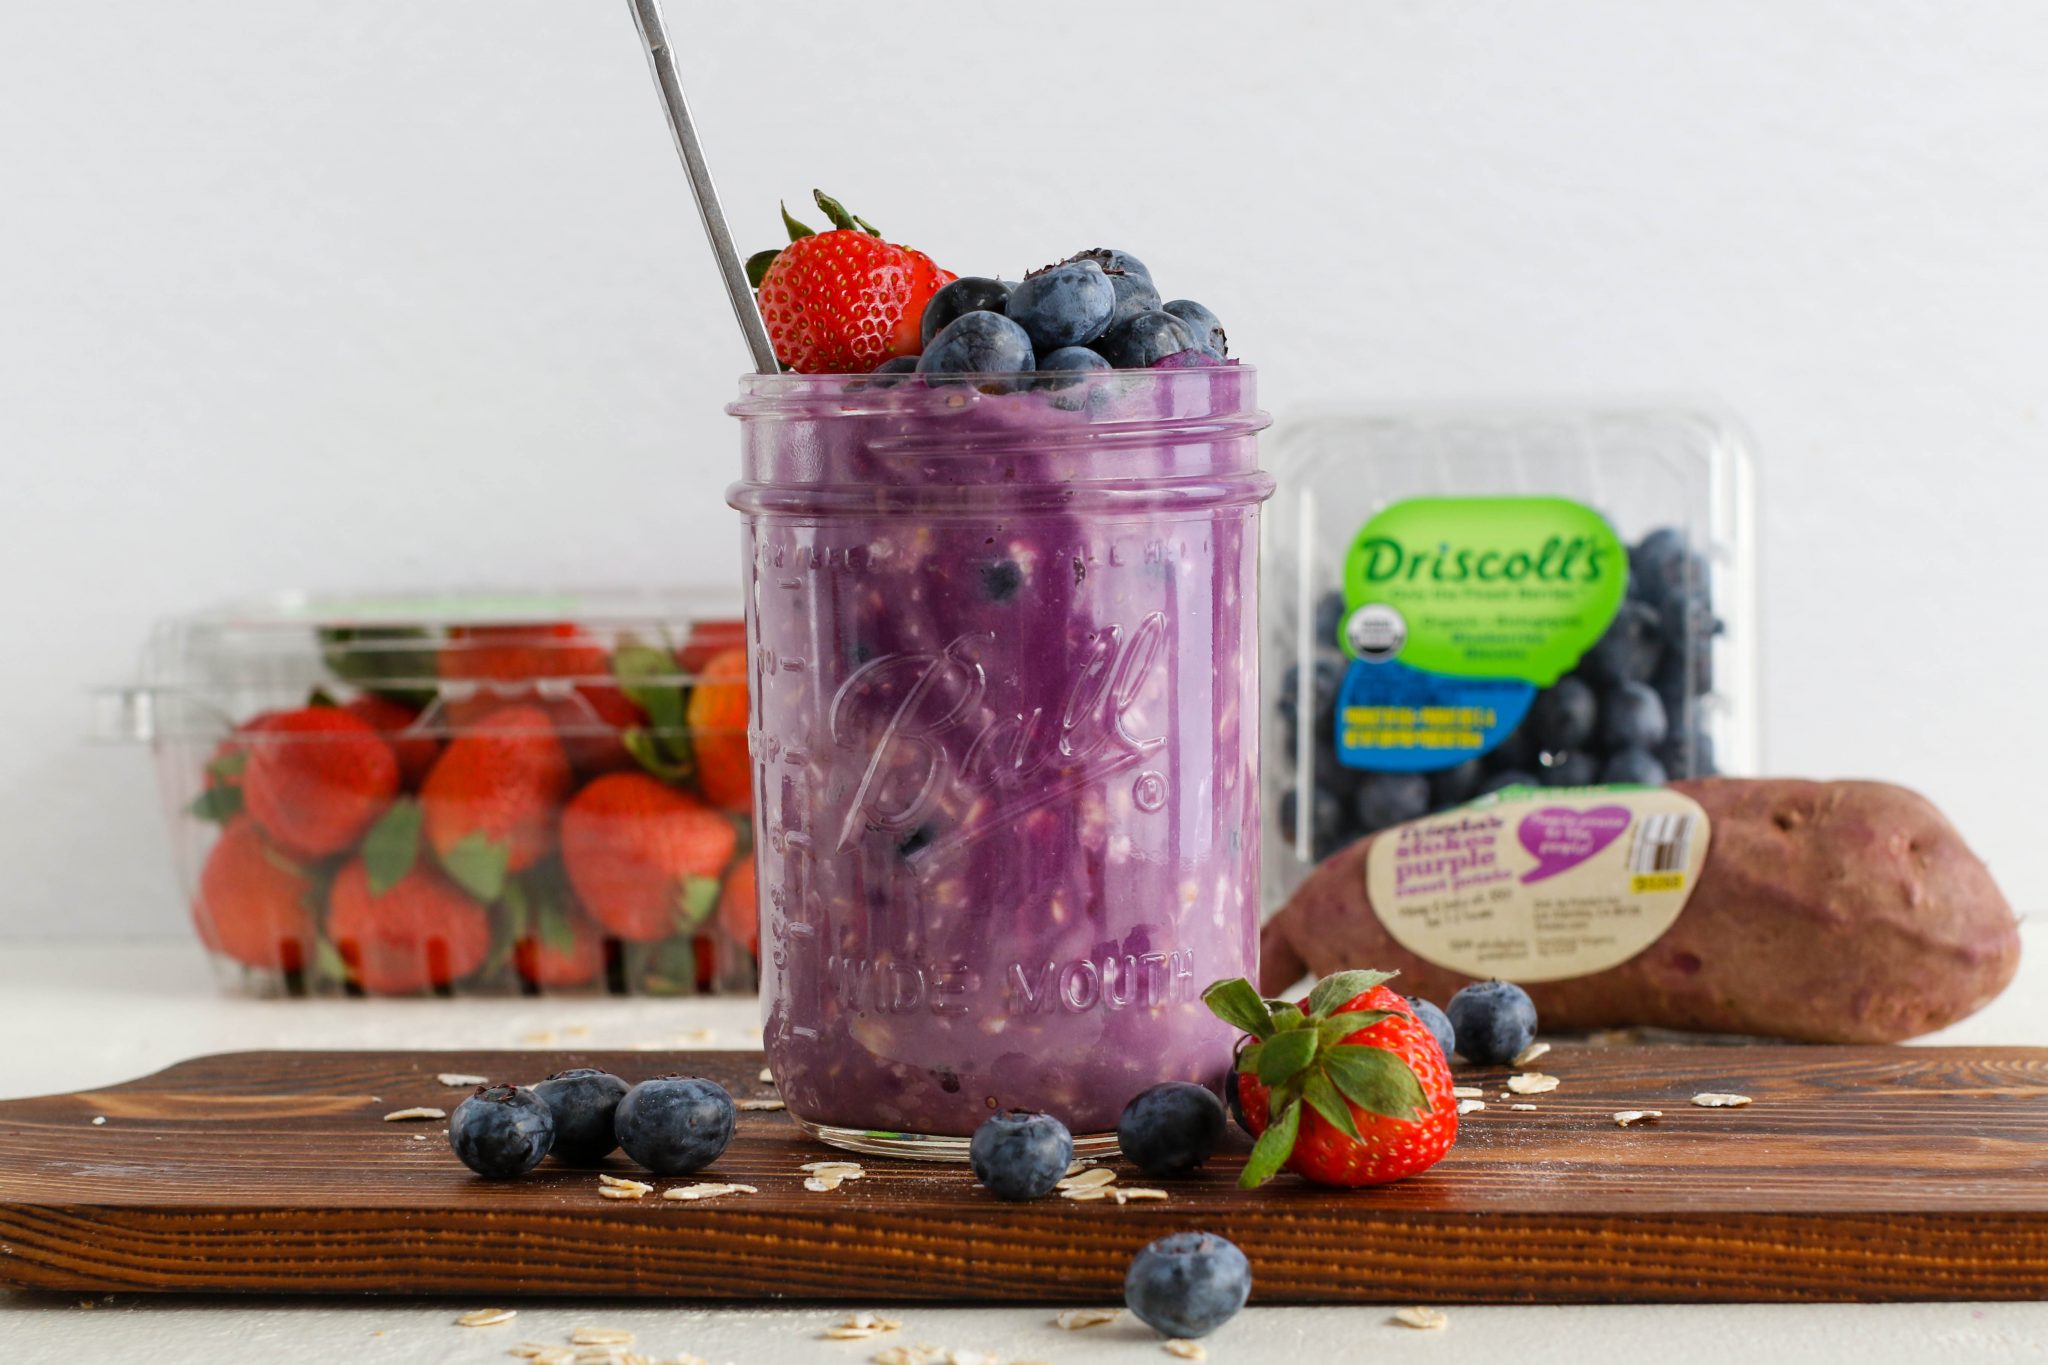 Purple Sweet Potato Overnight Oats with Driscolls Berries by Flora & Vino 